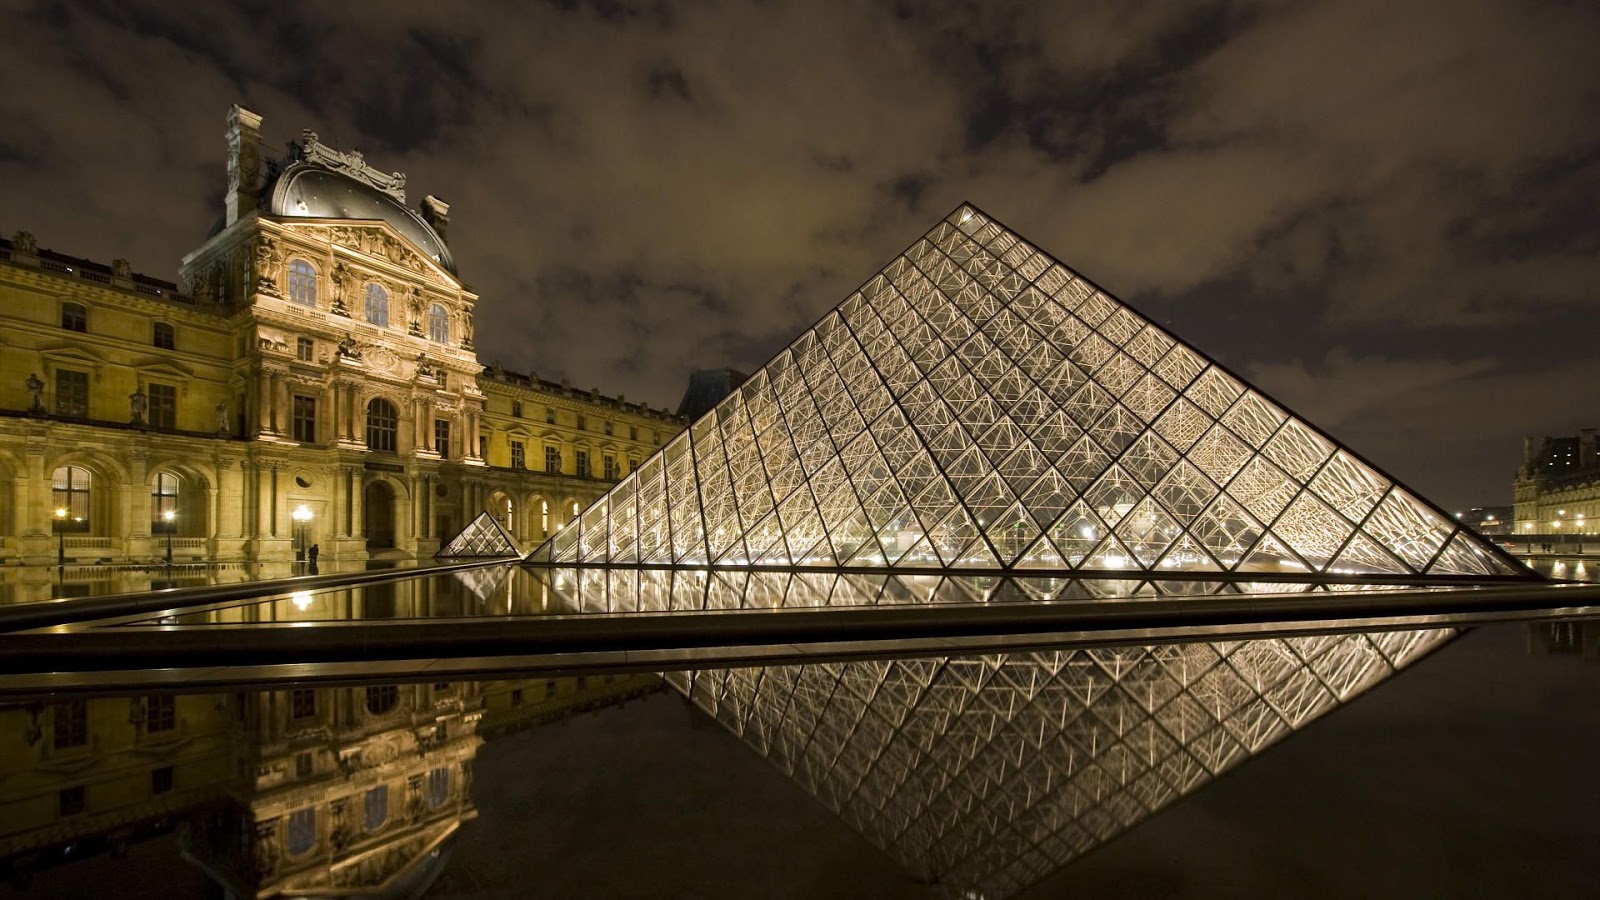 HD Wallpaper For Windows Louvre Pyramid